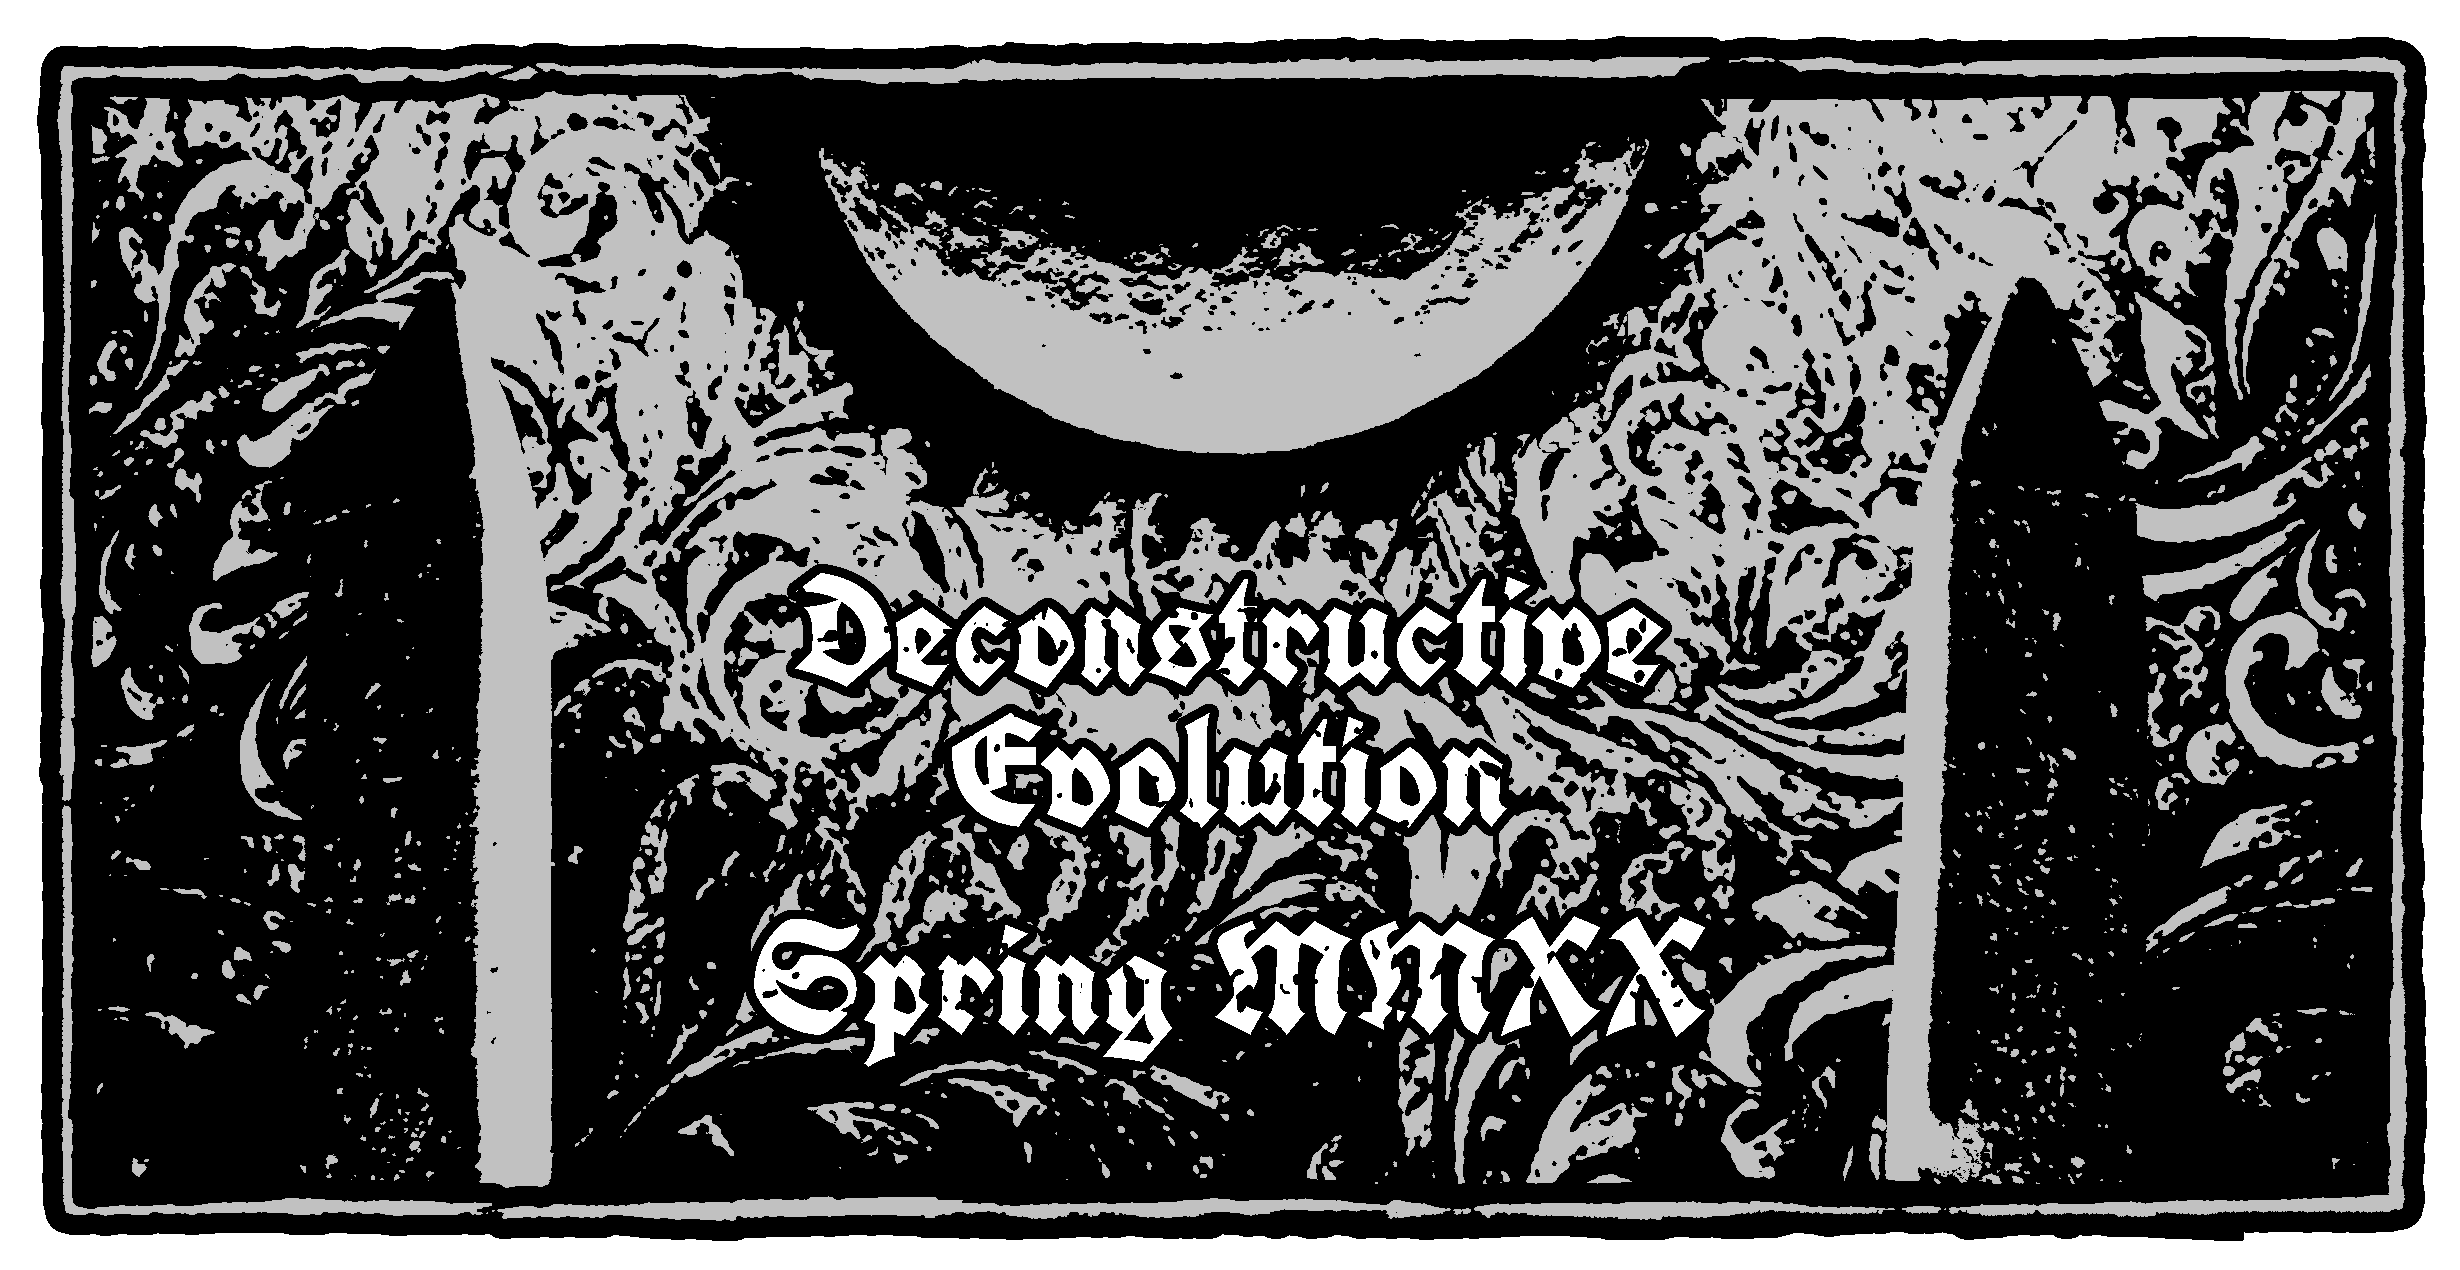 Prmotional image and navigation button with two obelisks under a moon. The text reads Deconstructive Evolution, Spring 2020 stylized in roman numerals